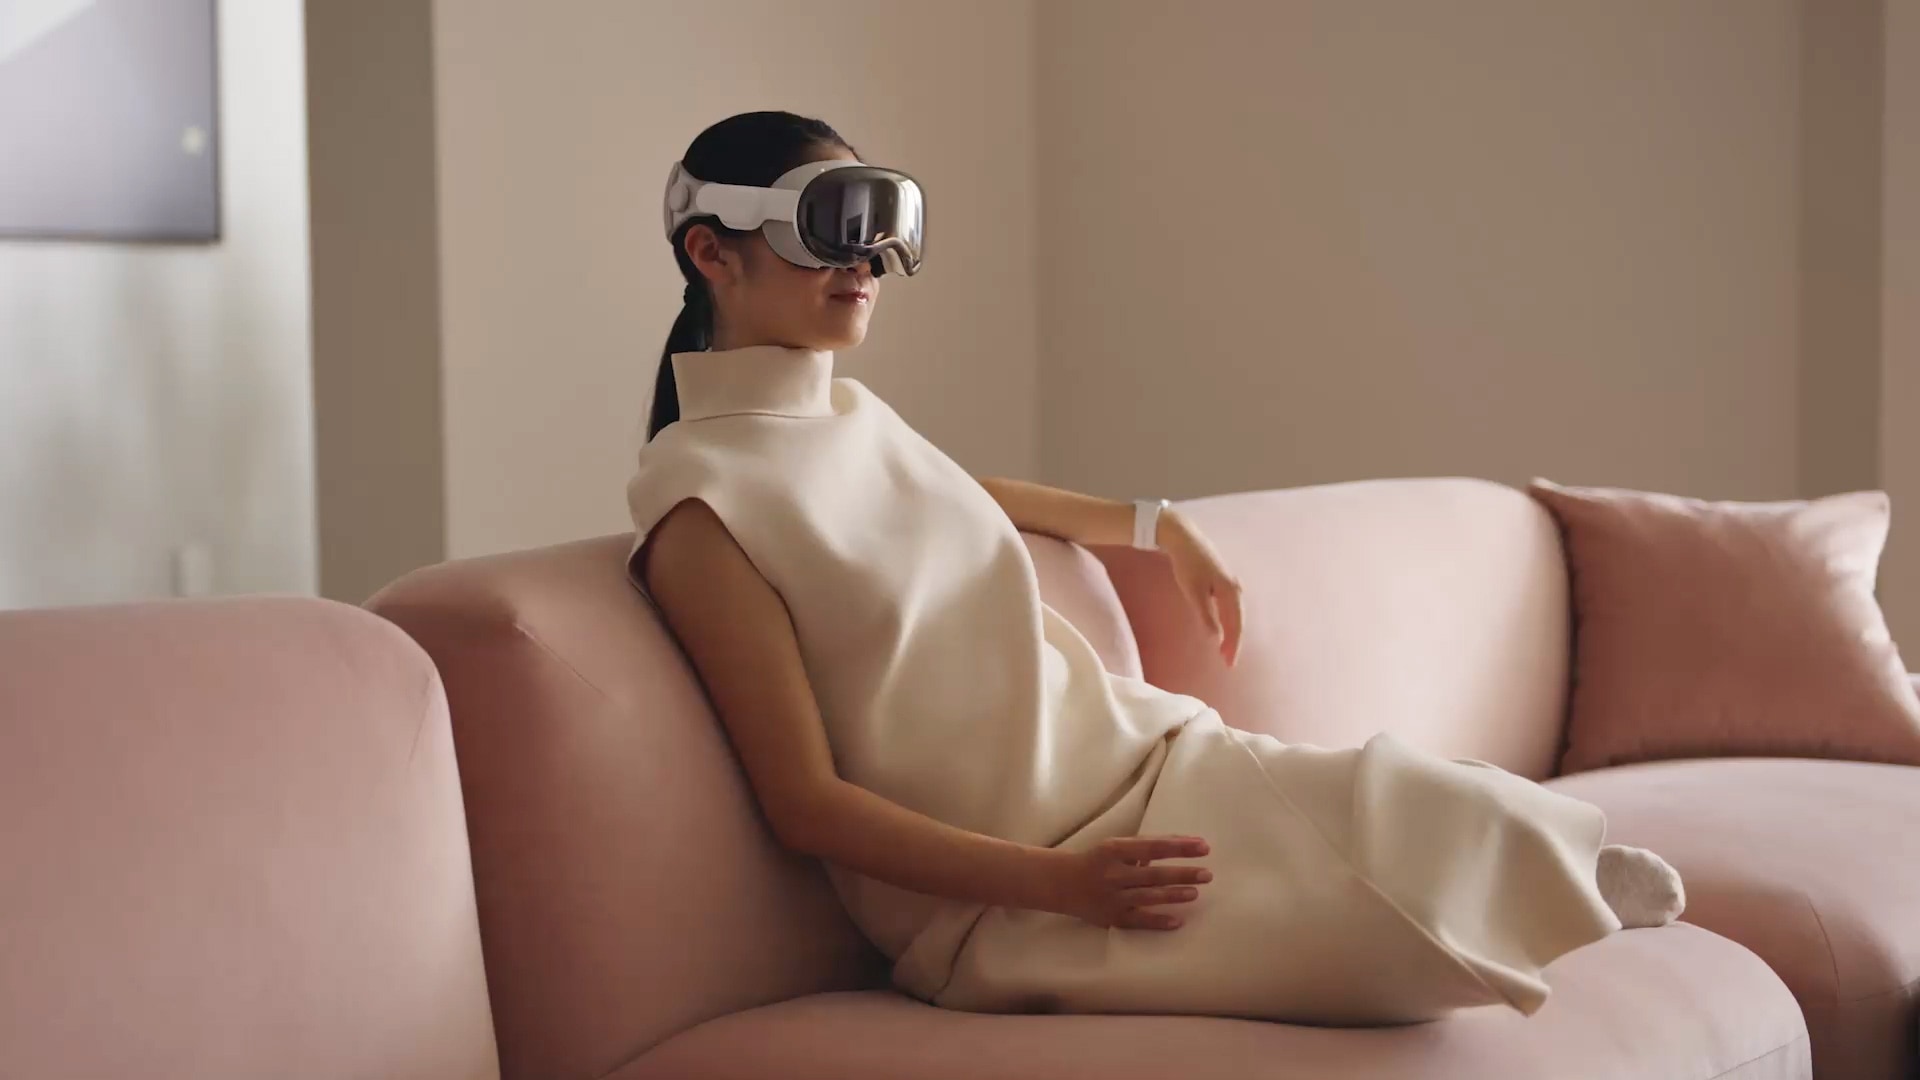 Woman sitting on a couch, wearing Apple's Vision Pro headset and performing hand gestures